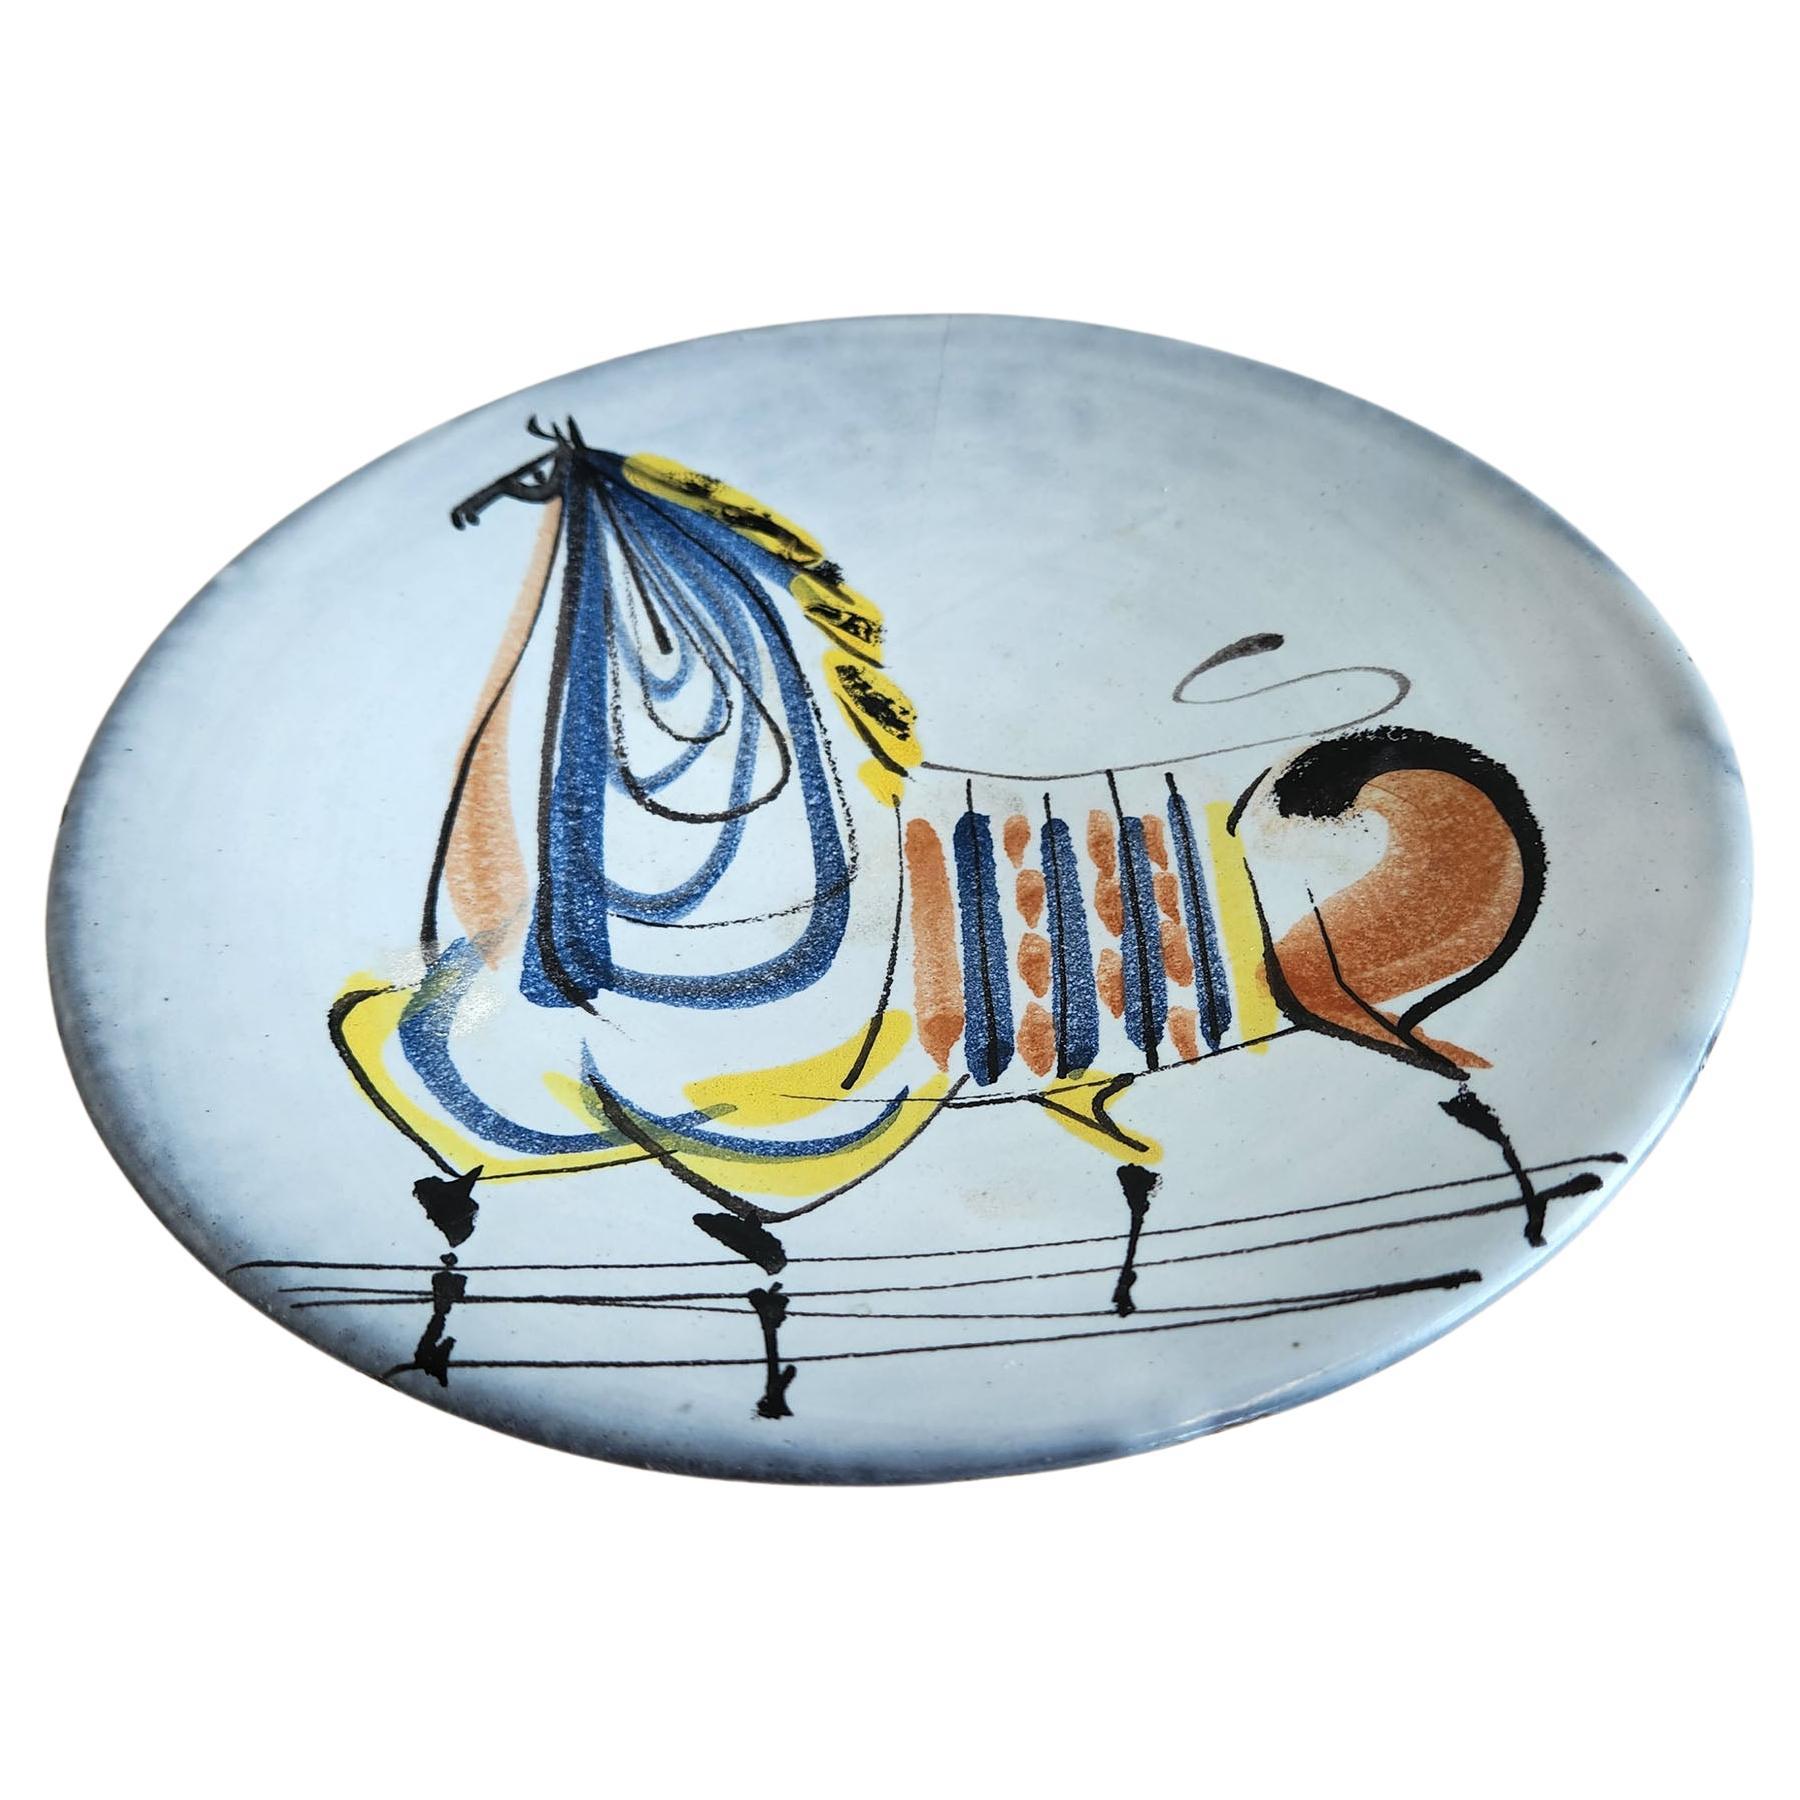 Roger Capron - Vintage Ceramic Plate with Horse For Sale